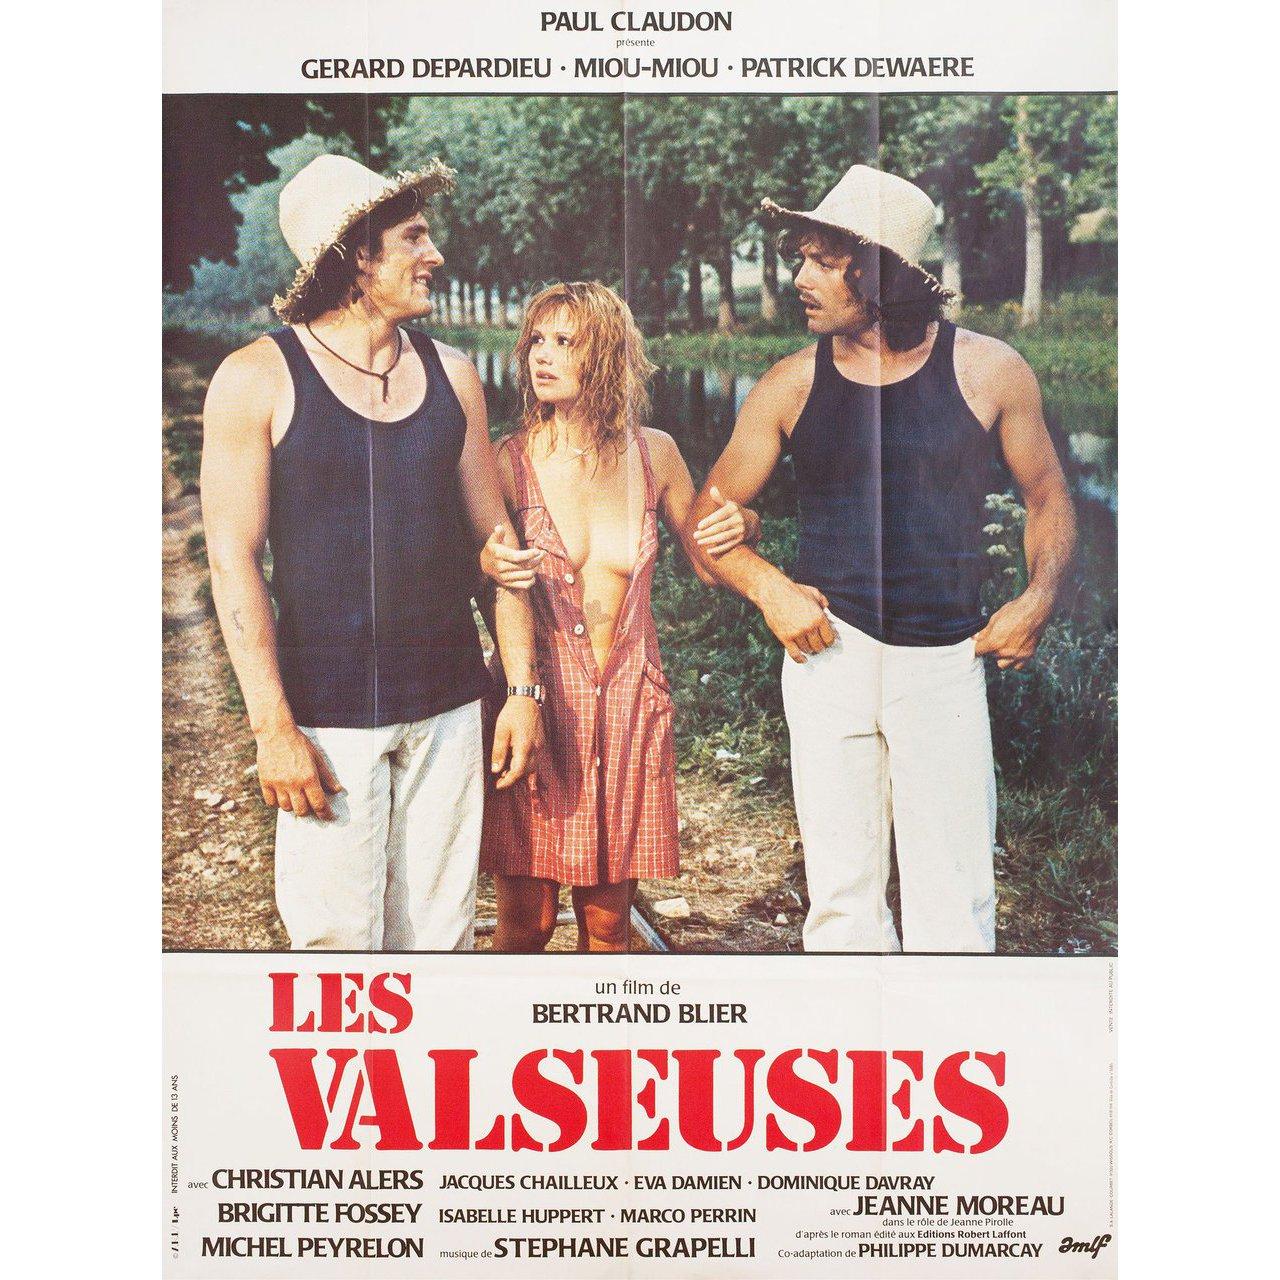 Original 1974 French grande poster for the film Going Places (Les Valseuses) directed by Bertrand Blier with Gerard Depardieu / Patrick Dewaere / Miou-Miou / Jeanne Moreau. Very good-fine condition, folded. Many original posters were issued folded